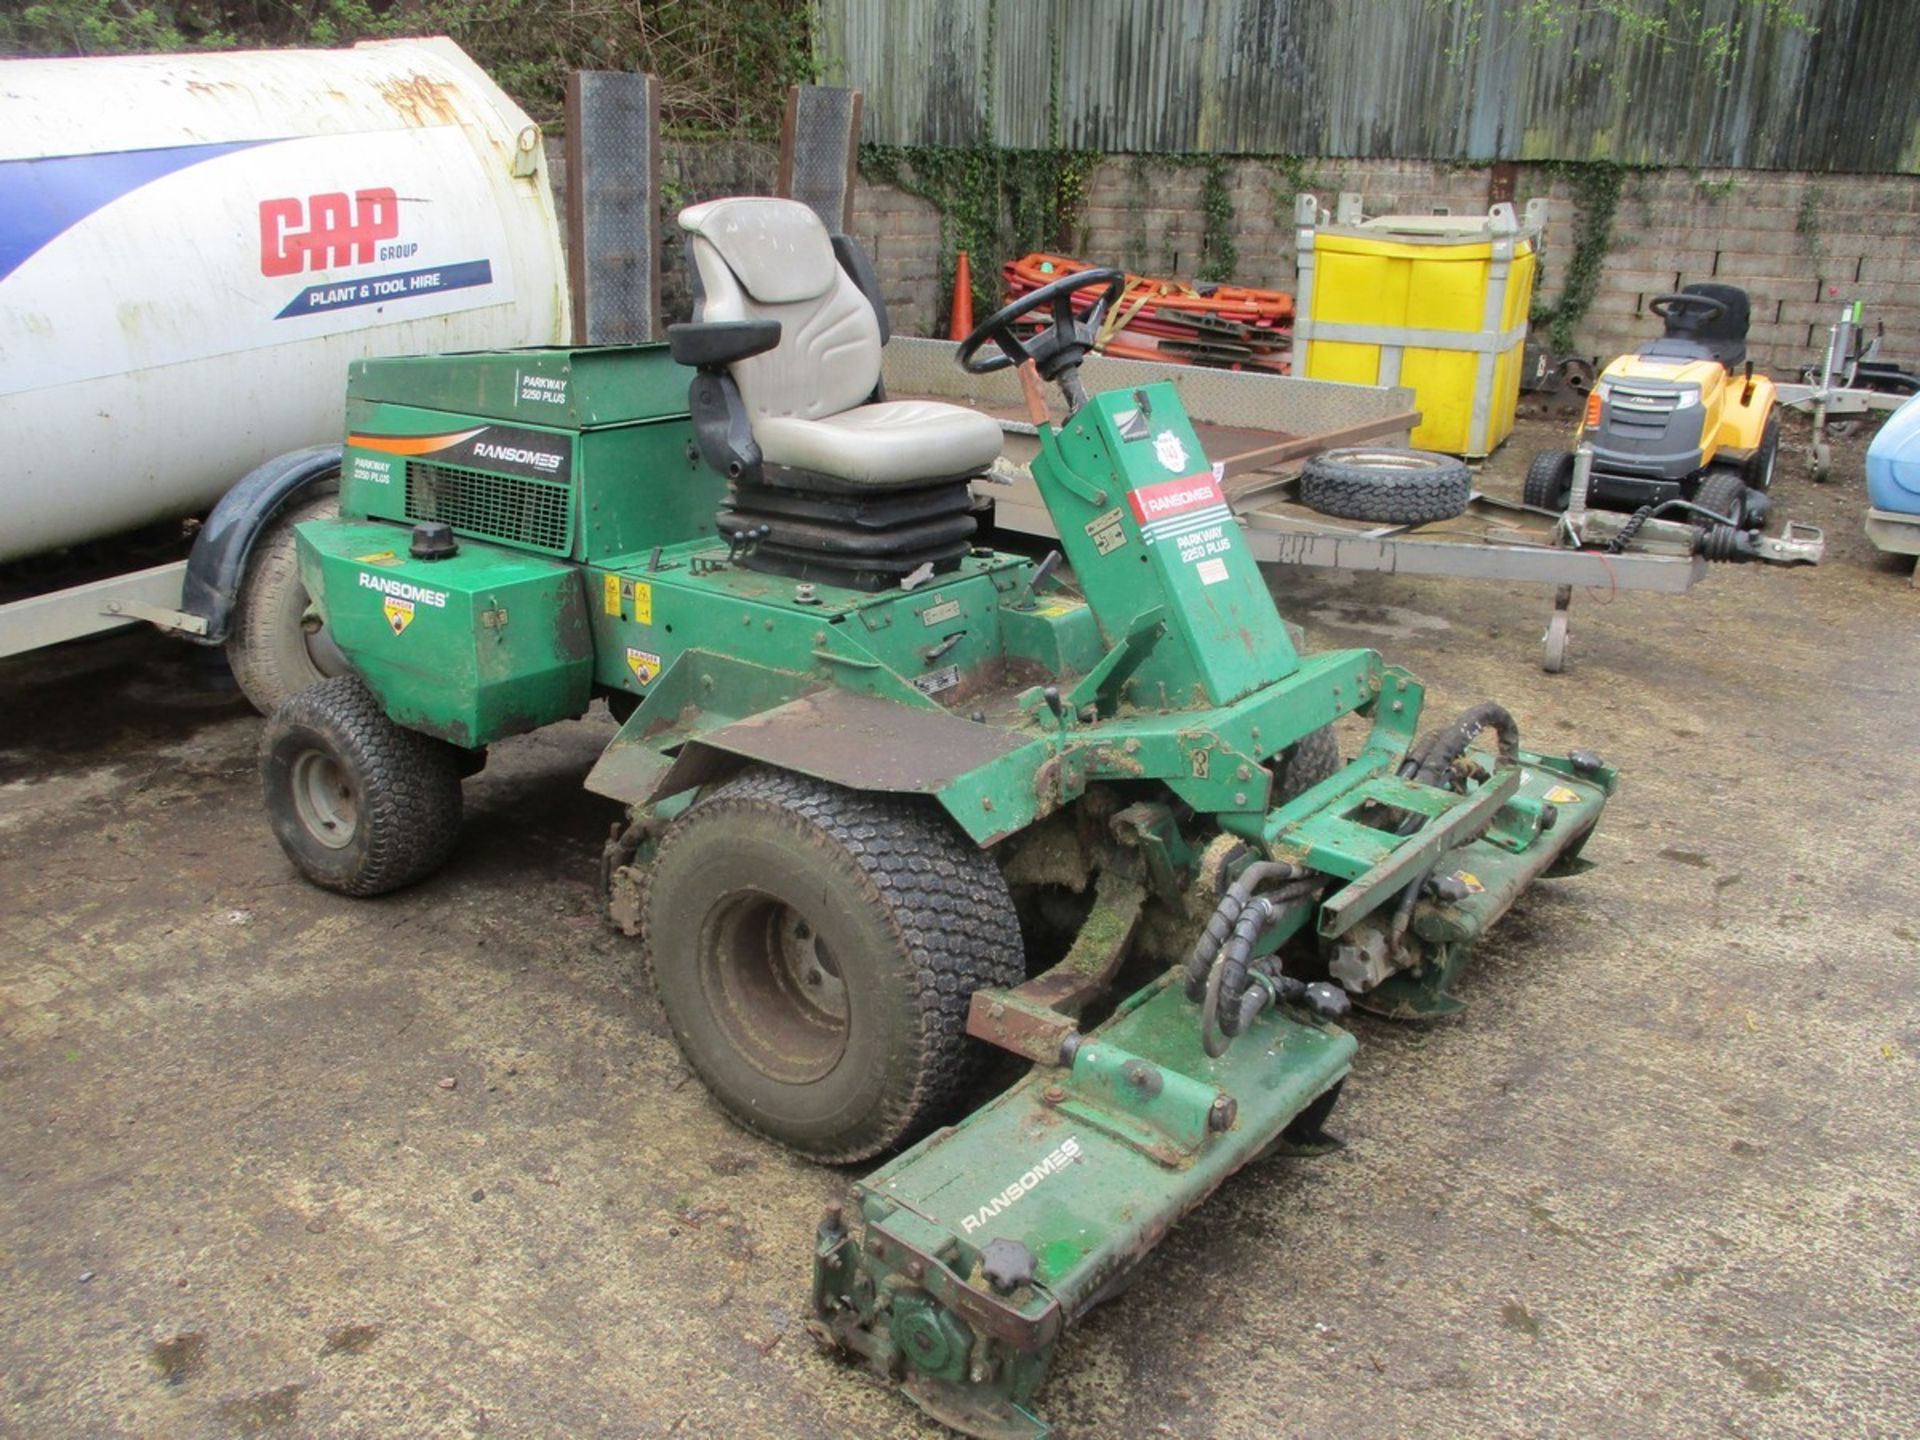 RANSOMES PARKWAY 2250 PLUS RIDE ON MOWER